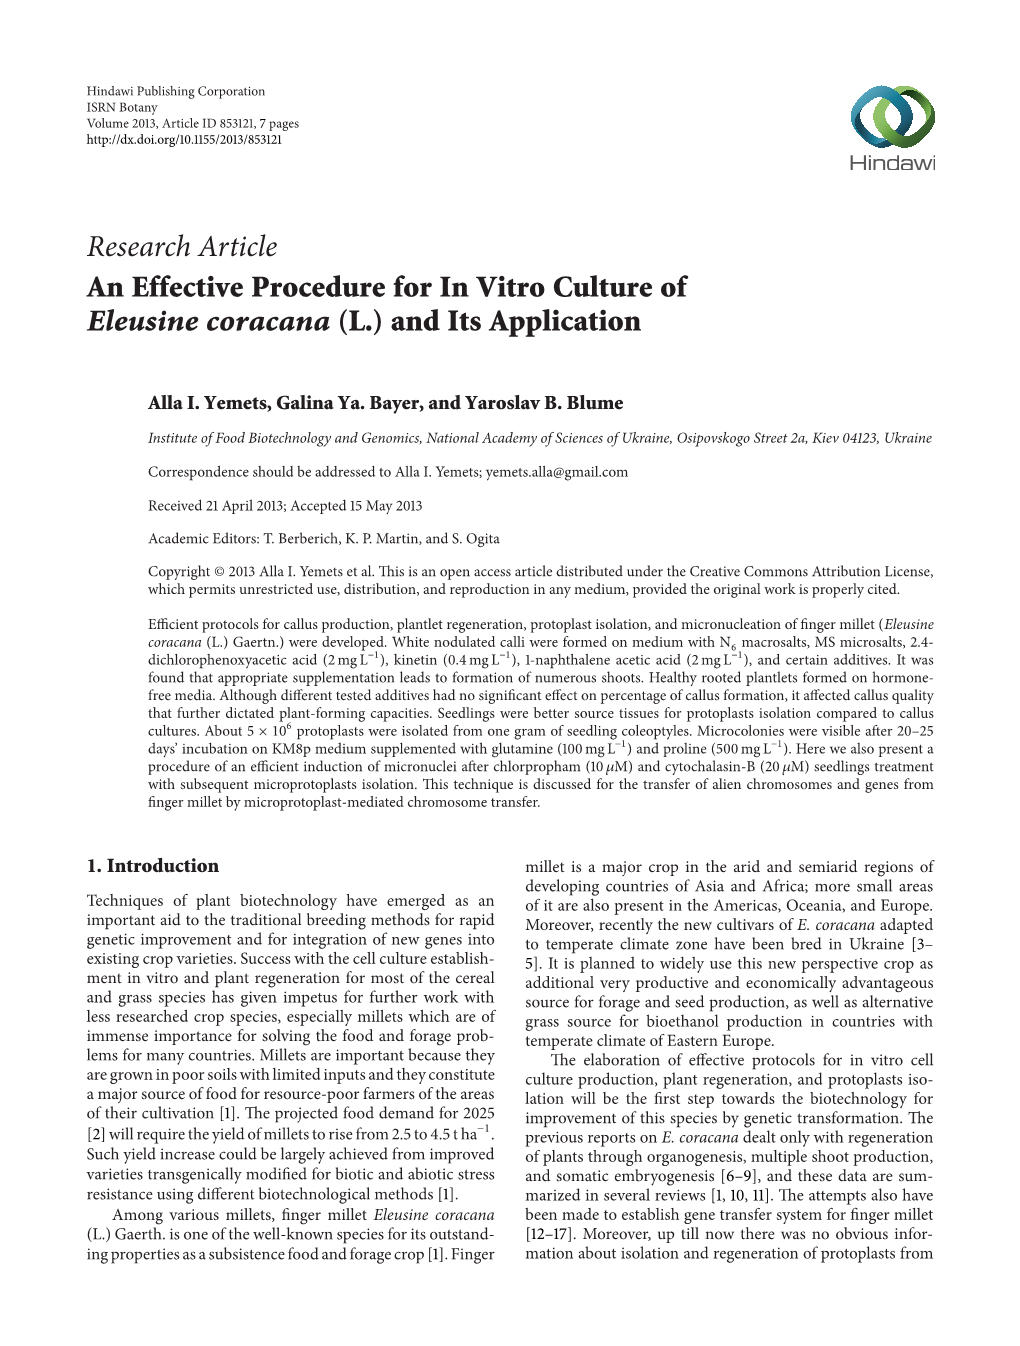 An Effective Procedure for in Vitro Culture of Eleusine Coracana (L.) and Its Application